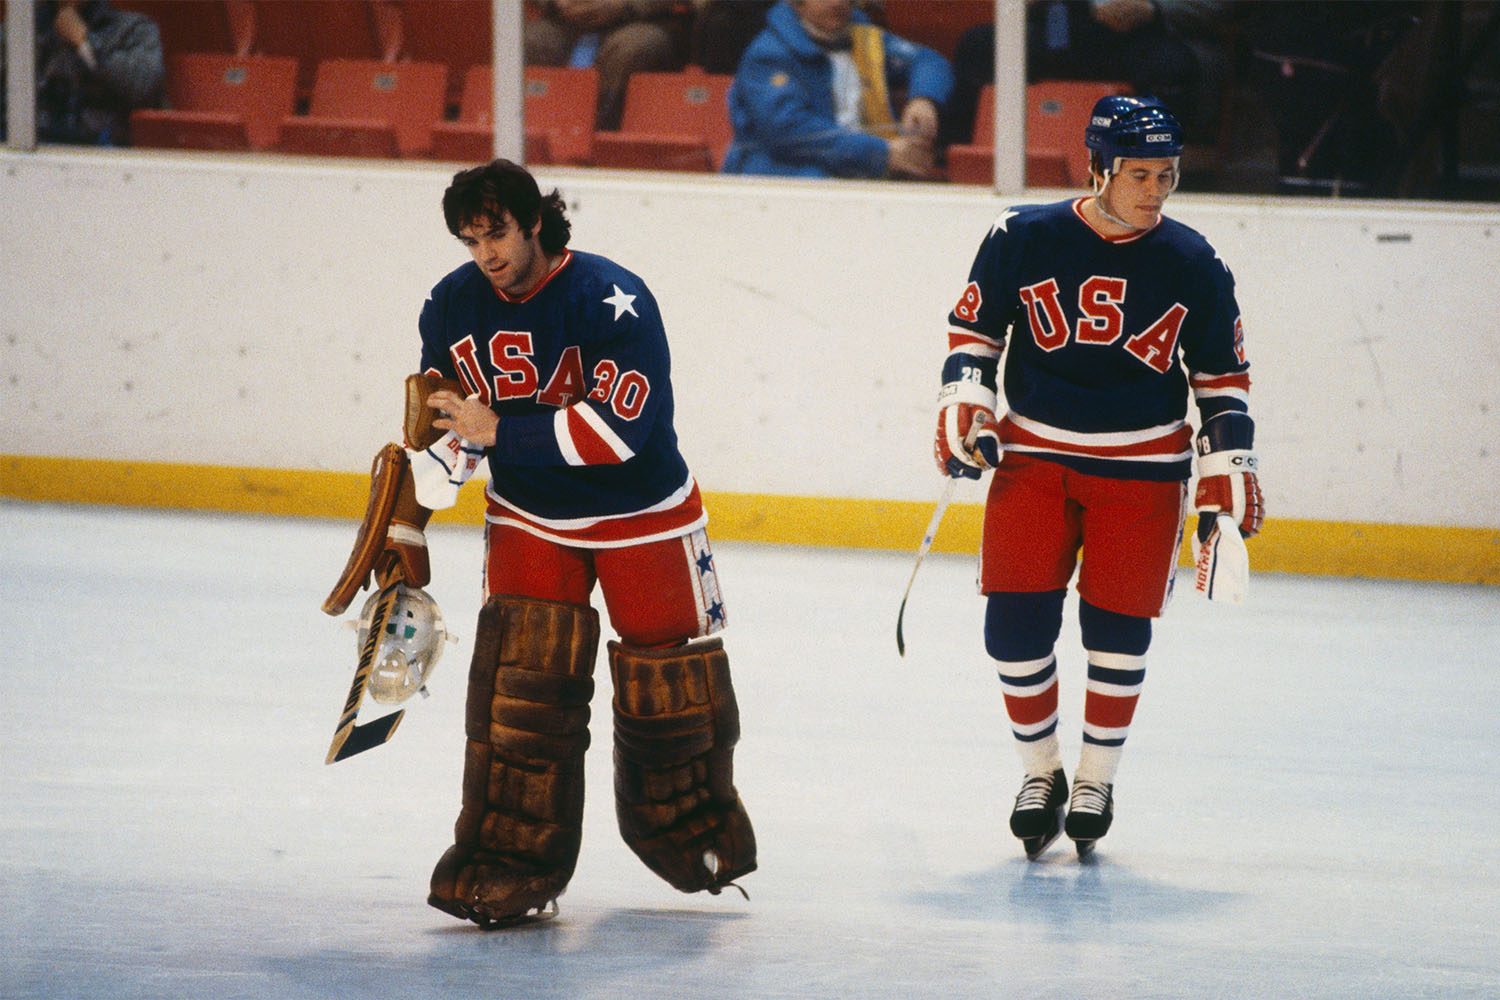 Two players from the infamous 1980 Miracle on Ice